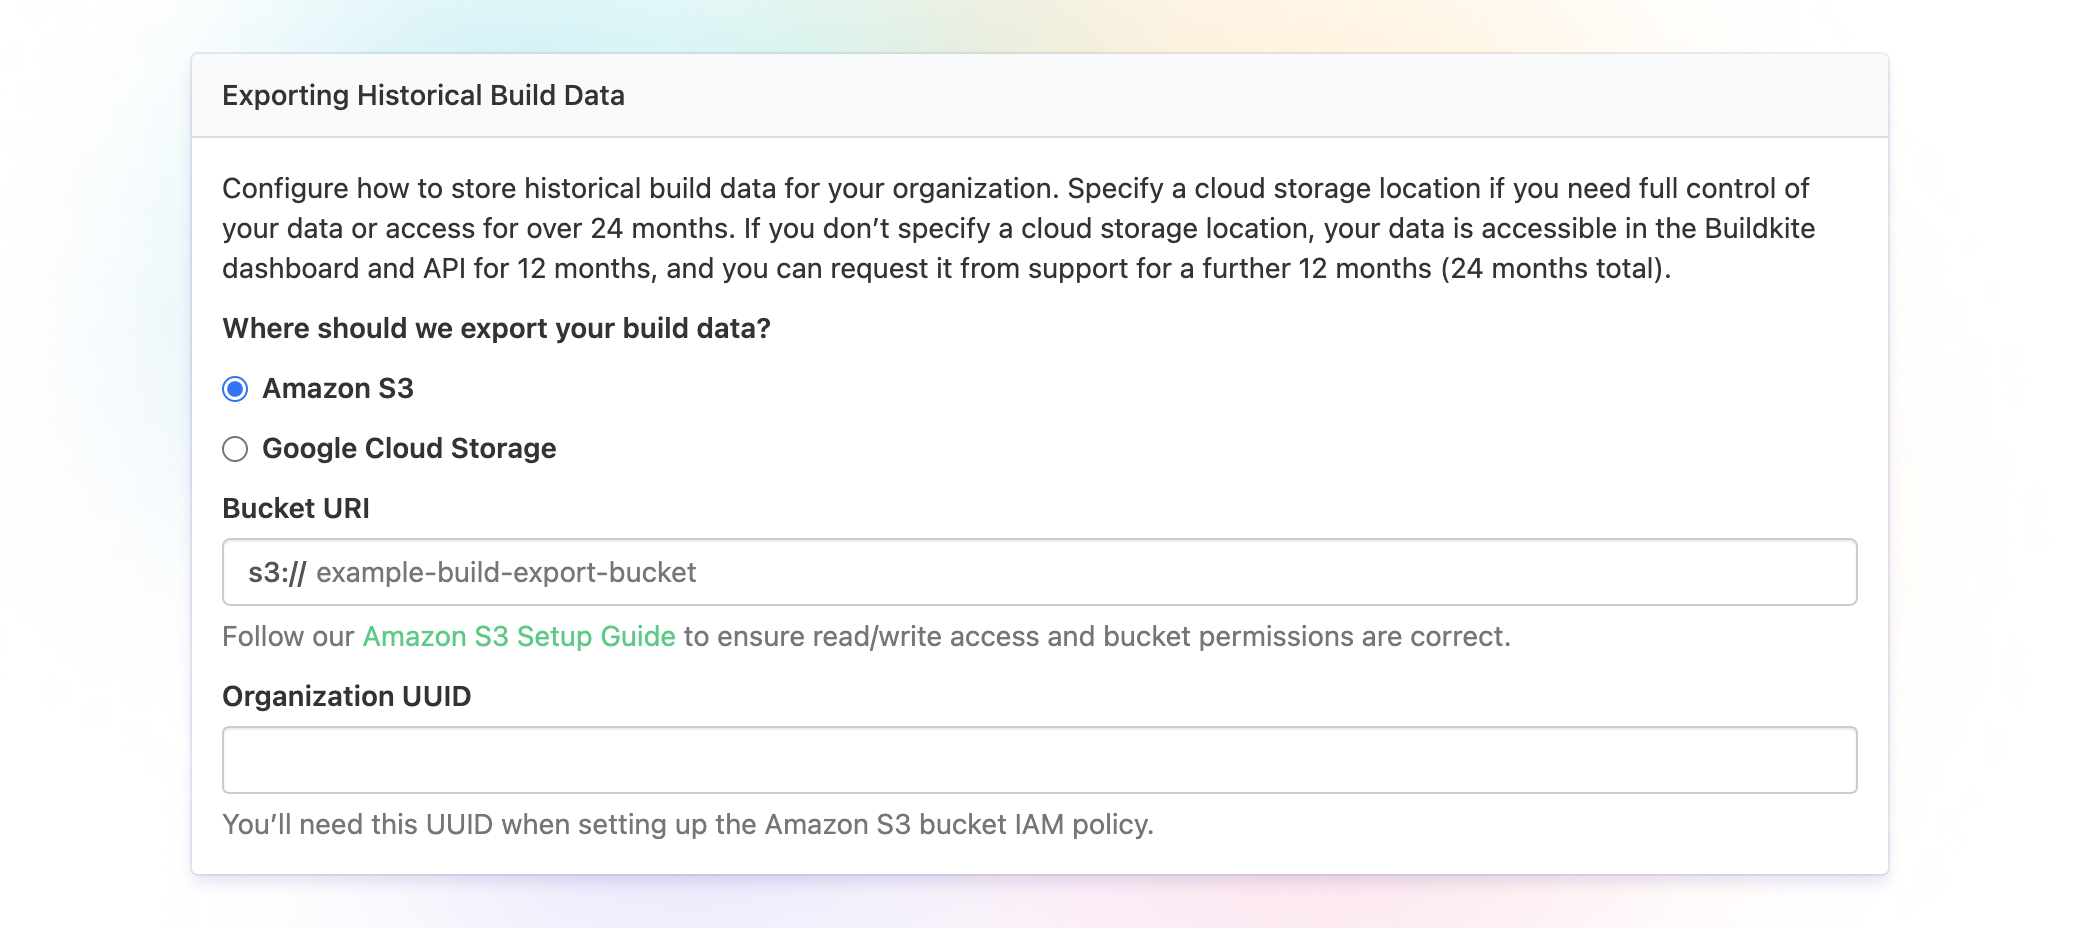 Store information about your builds in Amazon S3 or Google Cloud Storage buckets.